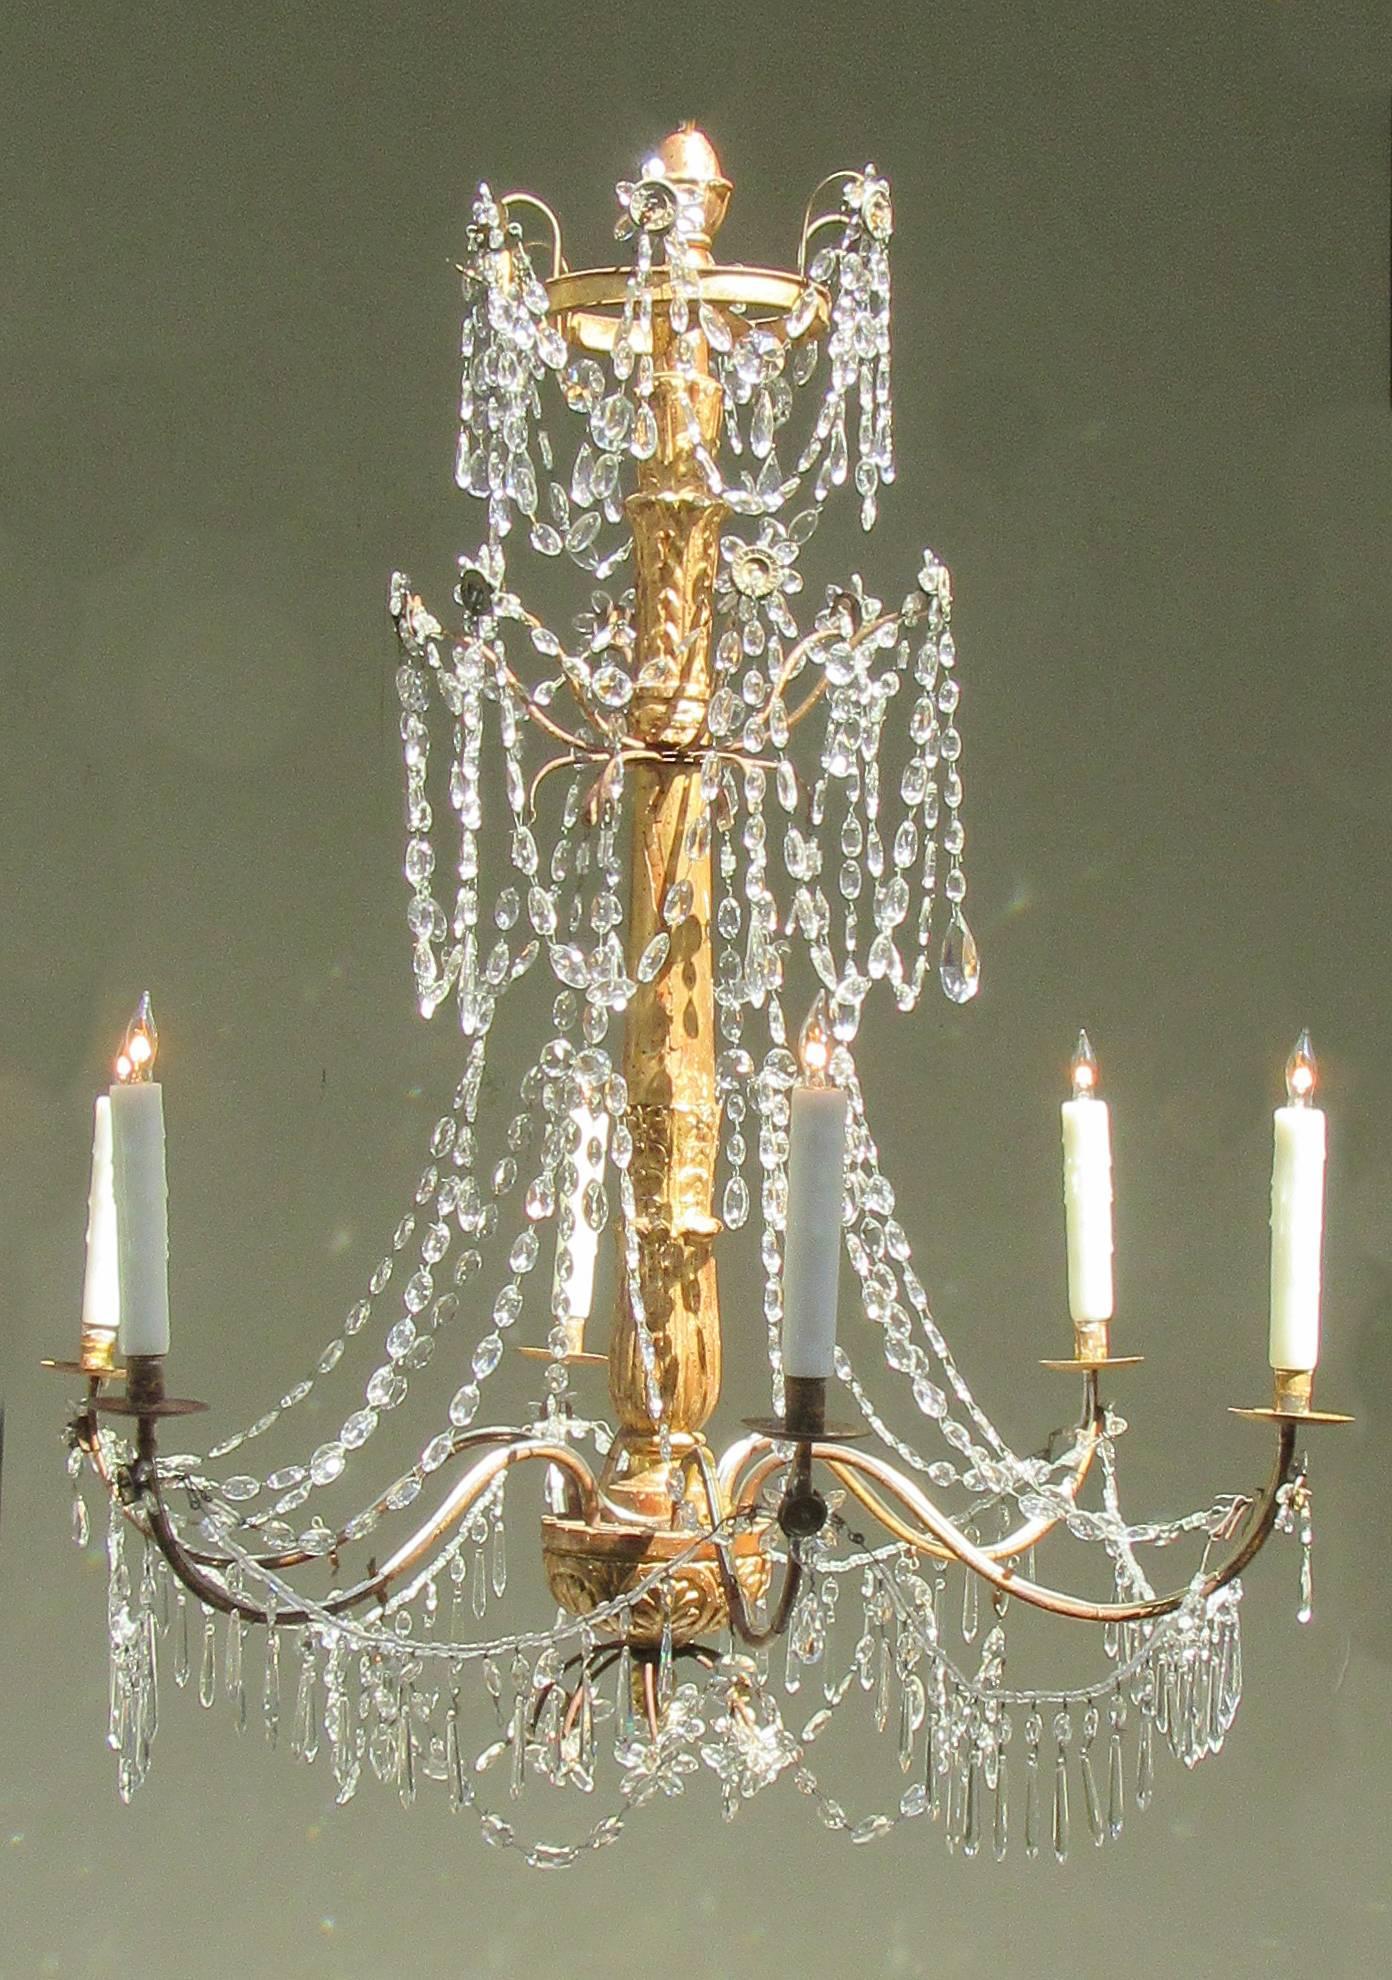 A late 18th century Italian Genoese giltwood, tole and crystal chandelier, circa 1780, with hand-carved stem and six candle arms draped with cut crystal pendants.